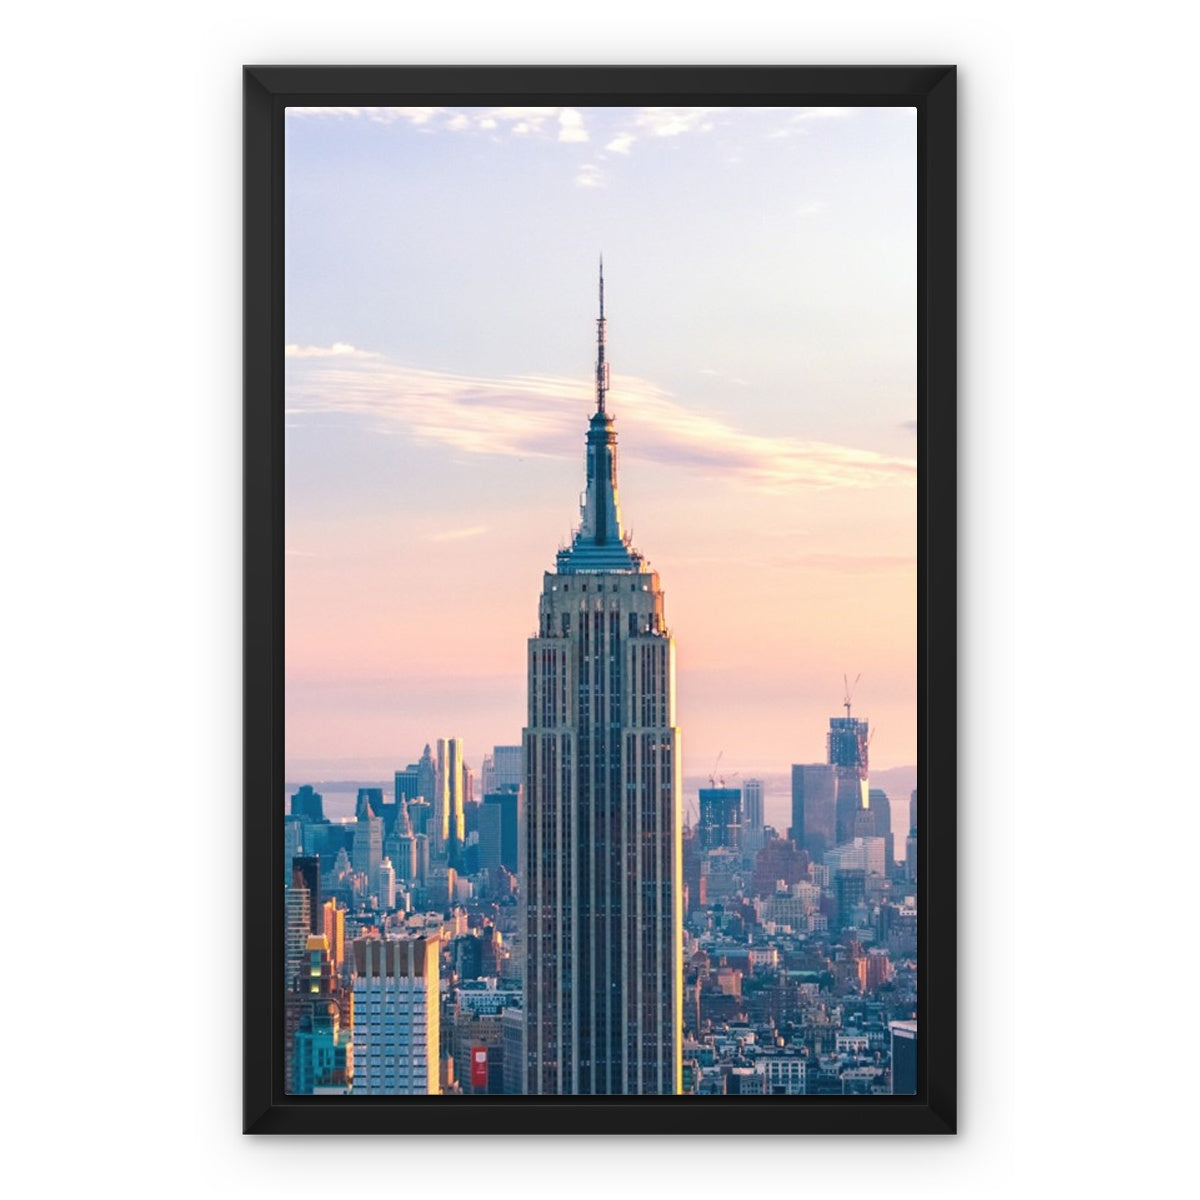 Empire State of Mind: A Clear Sky in NYC